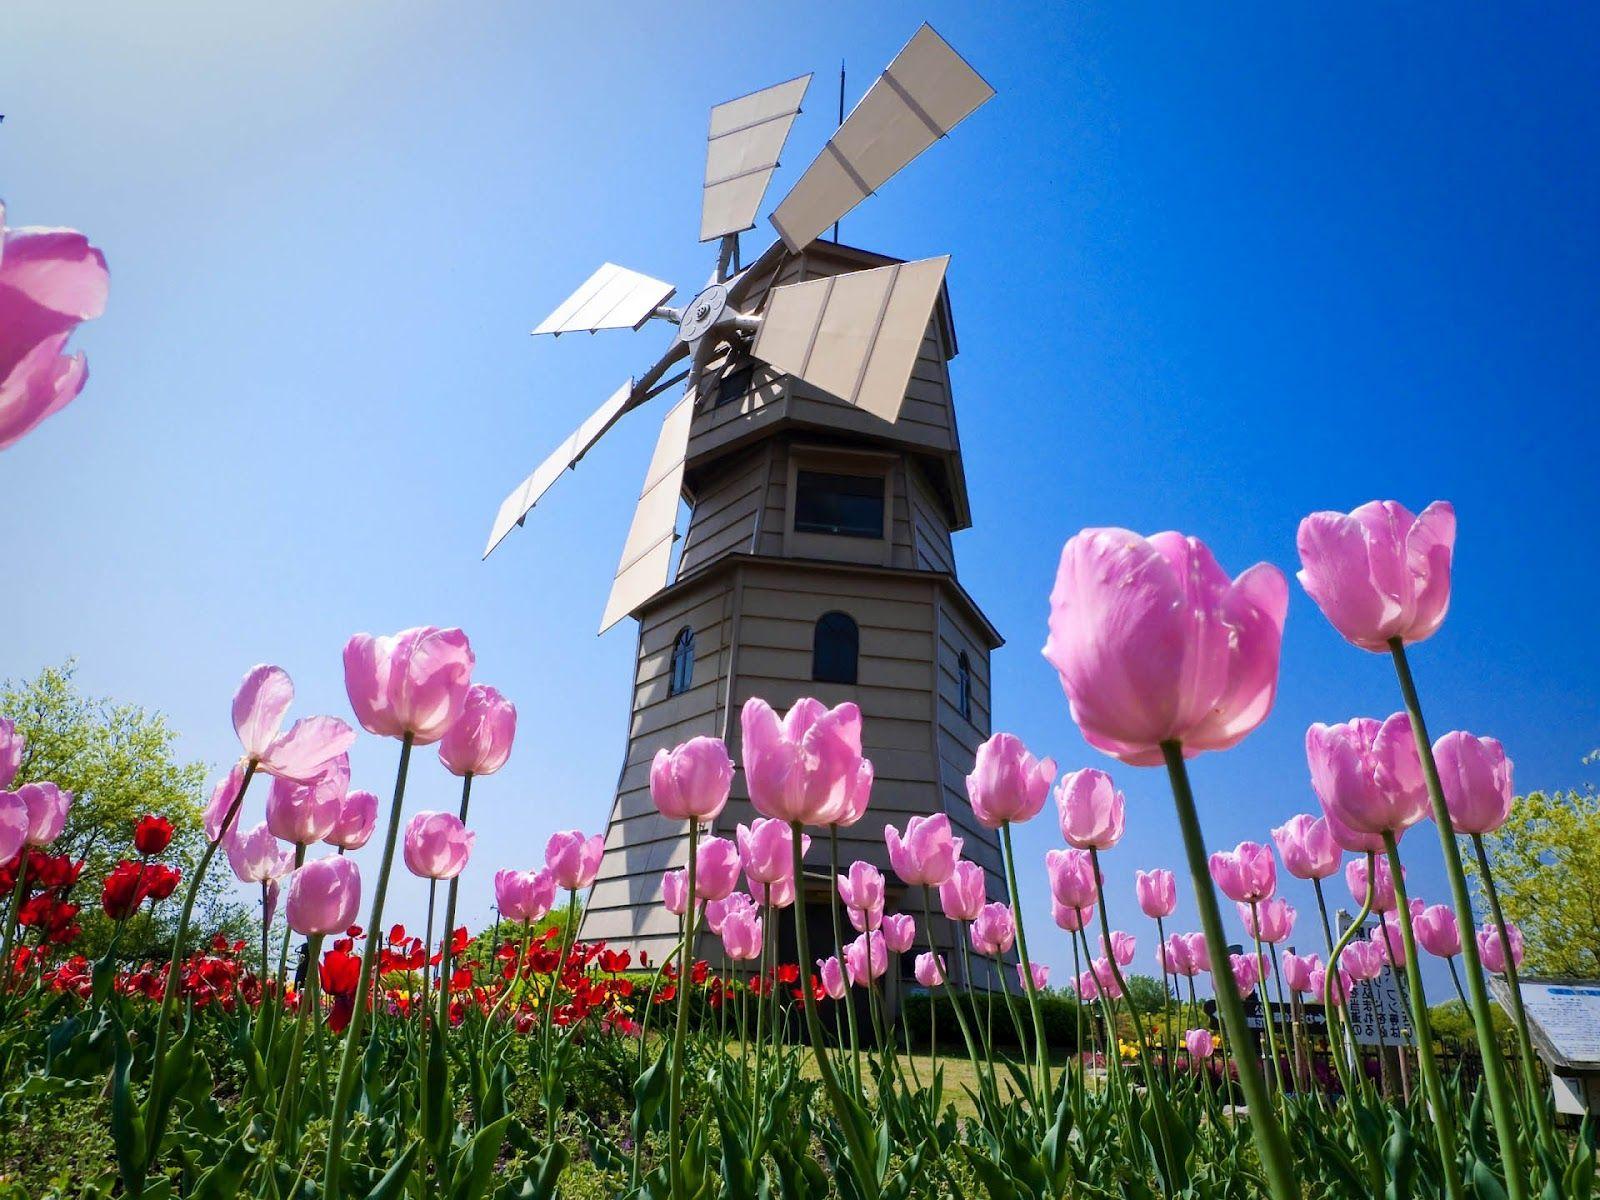 Dutch windmill and tulips. Spring wallpaper, Flower desktop wallpaper, Spring desktop wallpaper